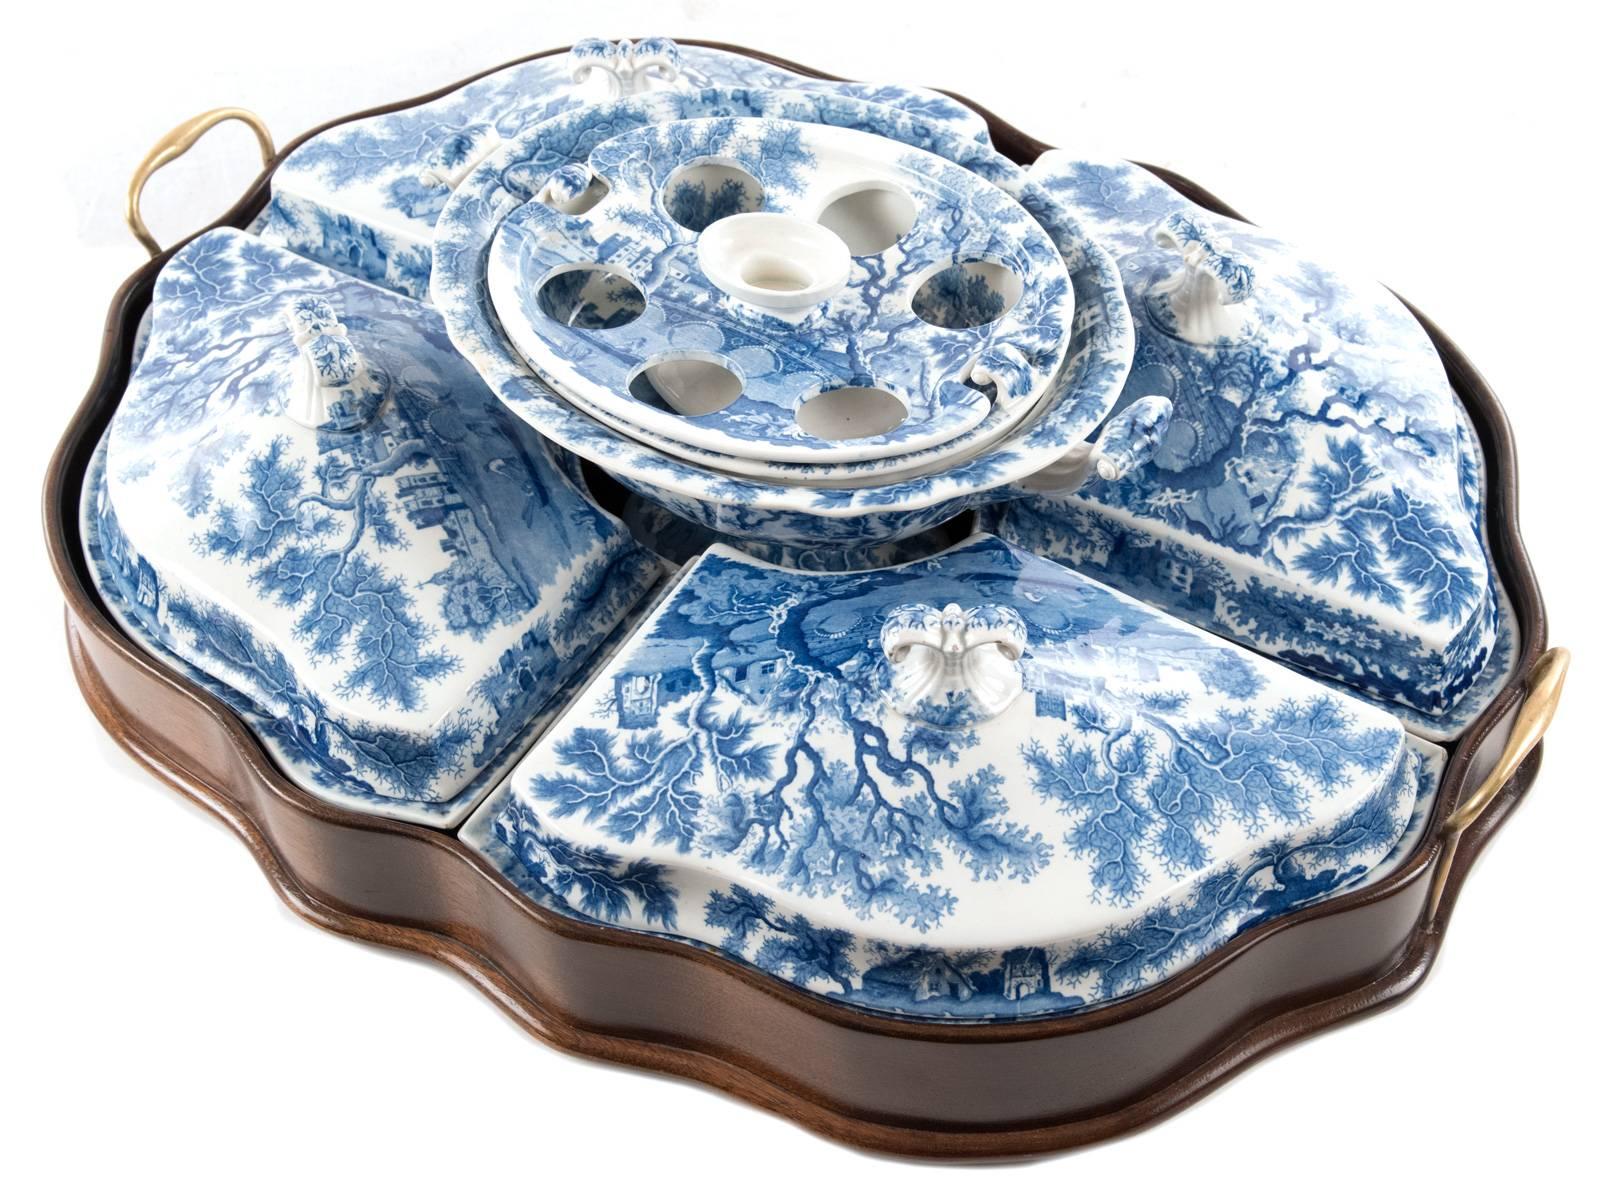 A double-handled brass serving dish of scallop form inset with blue and white porcelain serving compartments, which comprise four large dishes with lids around a central tureen, all decorated with a transfer design of an idyllic view across a river